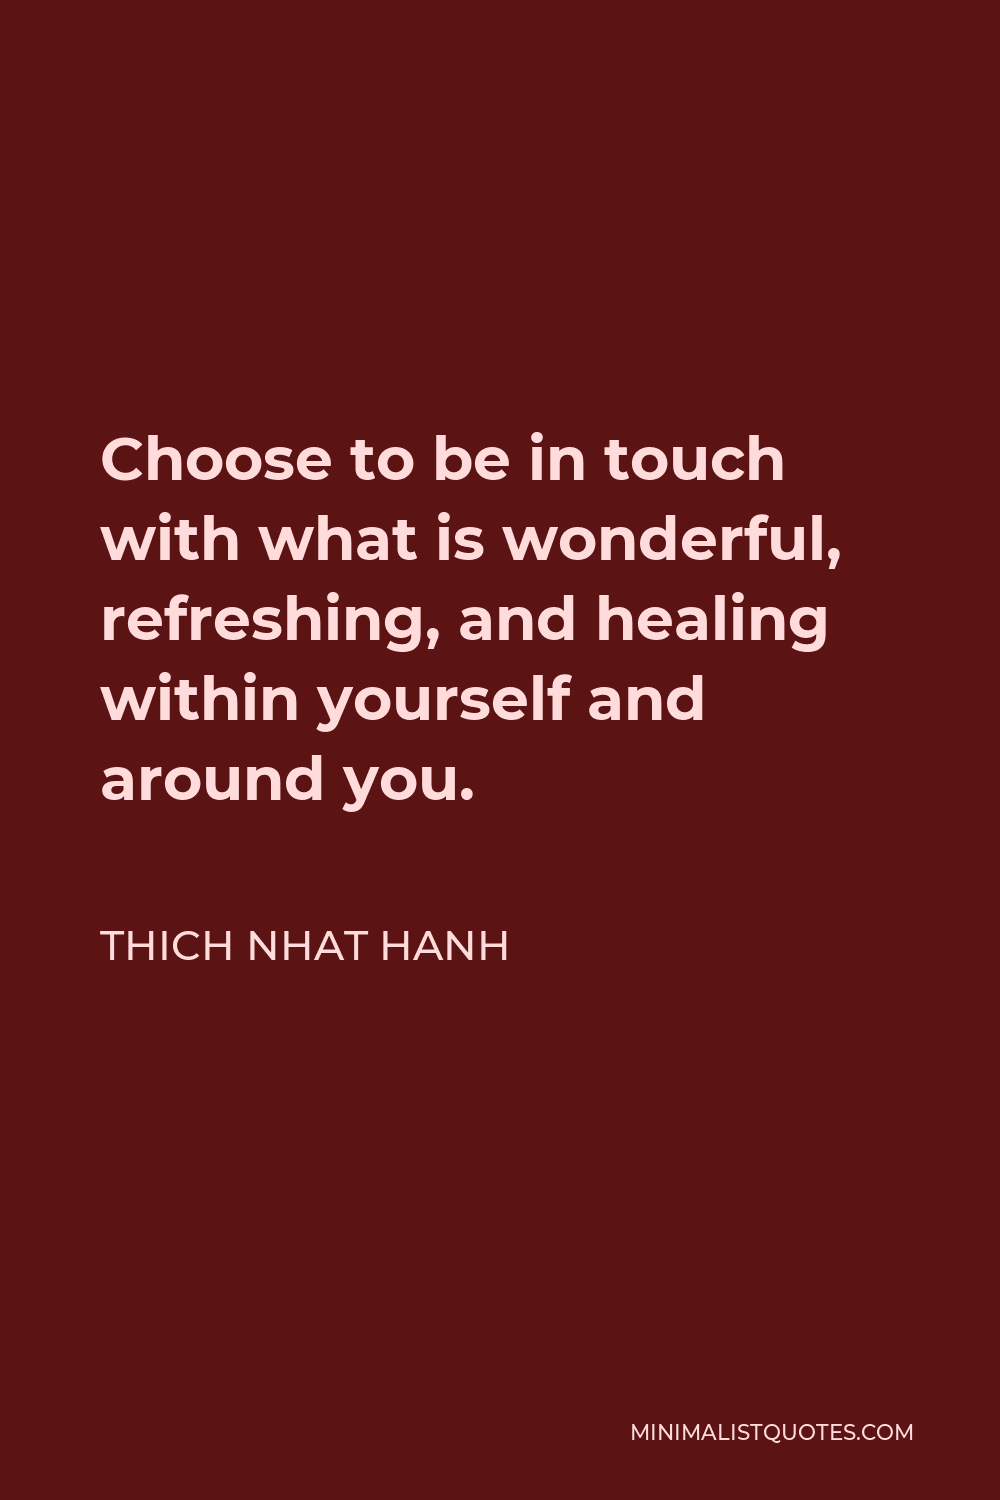 Thich Nhat Hanh Quote - Choose to be in touch with what is wonderful, refreshing, and healing within yourself and around you.